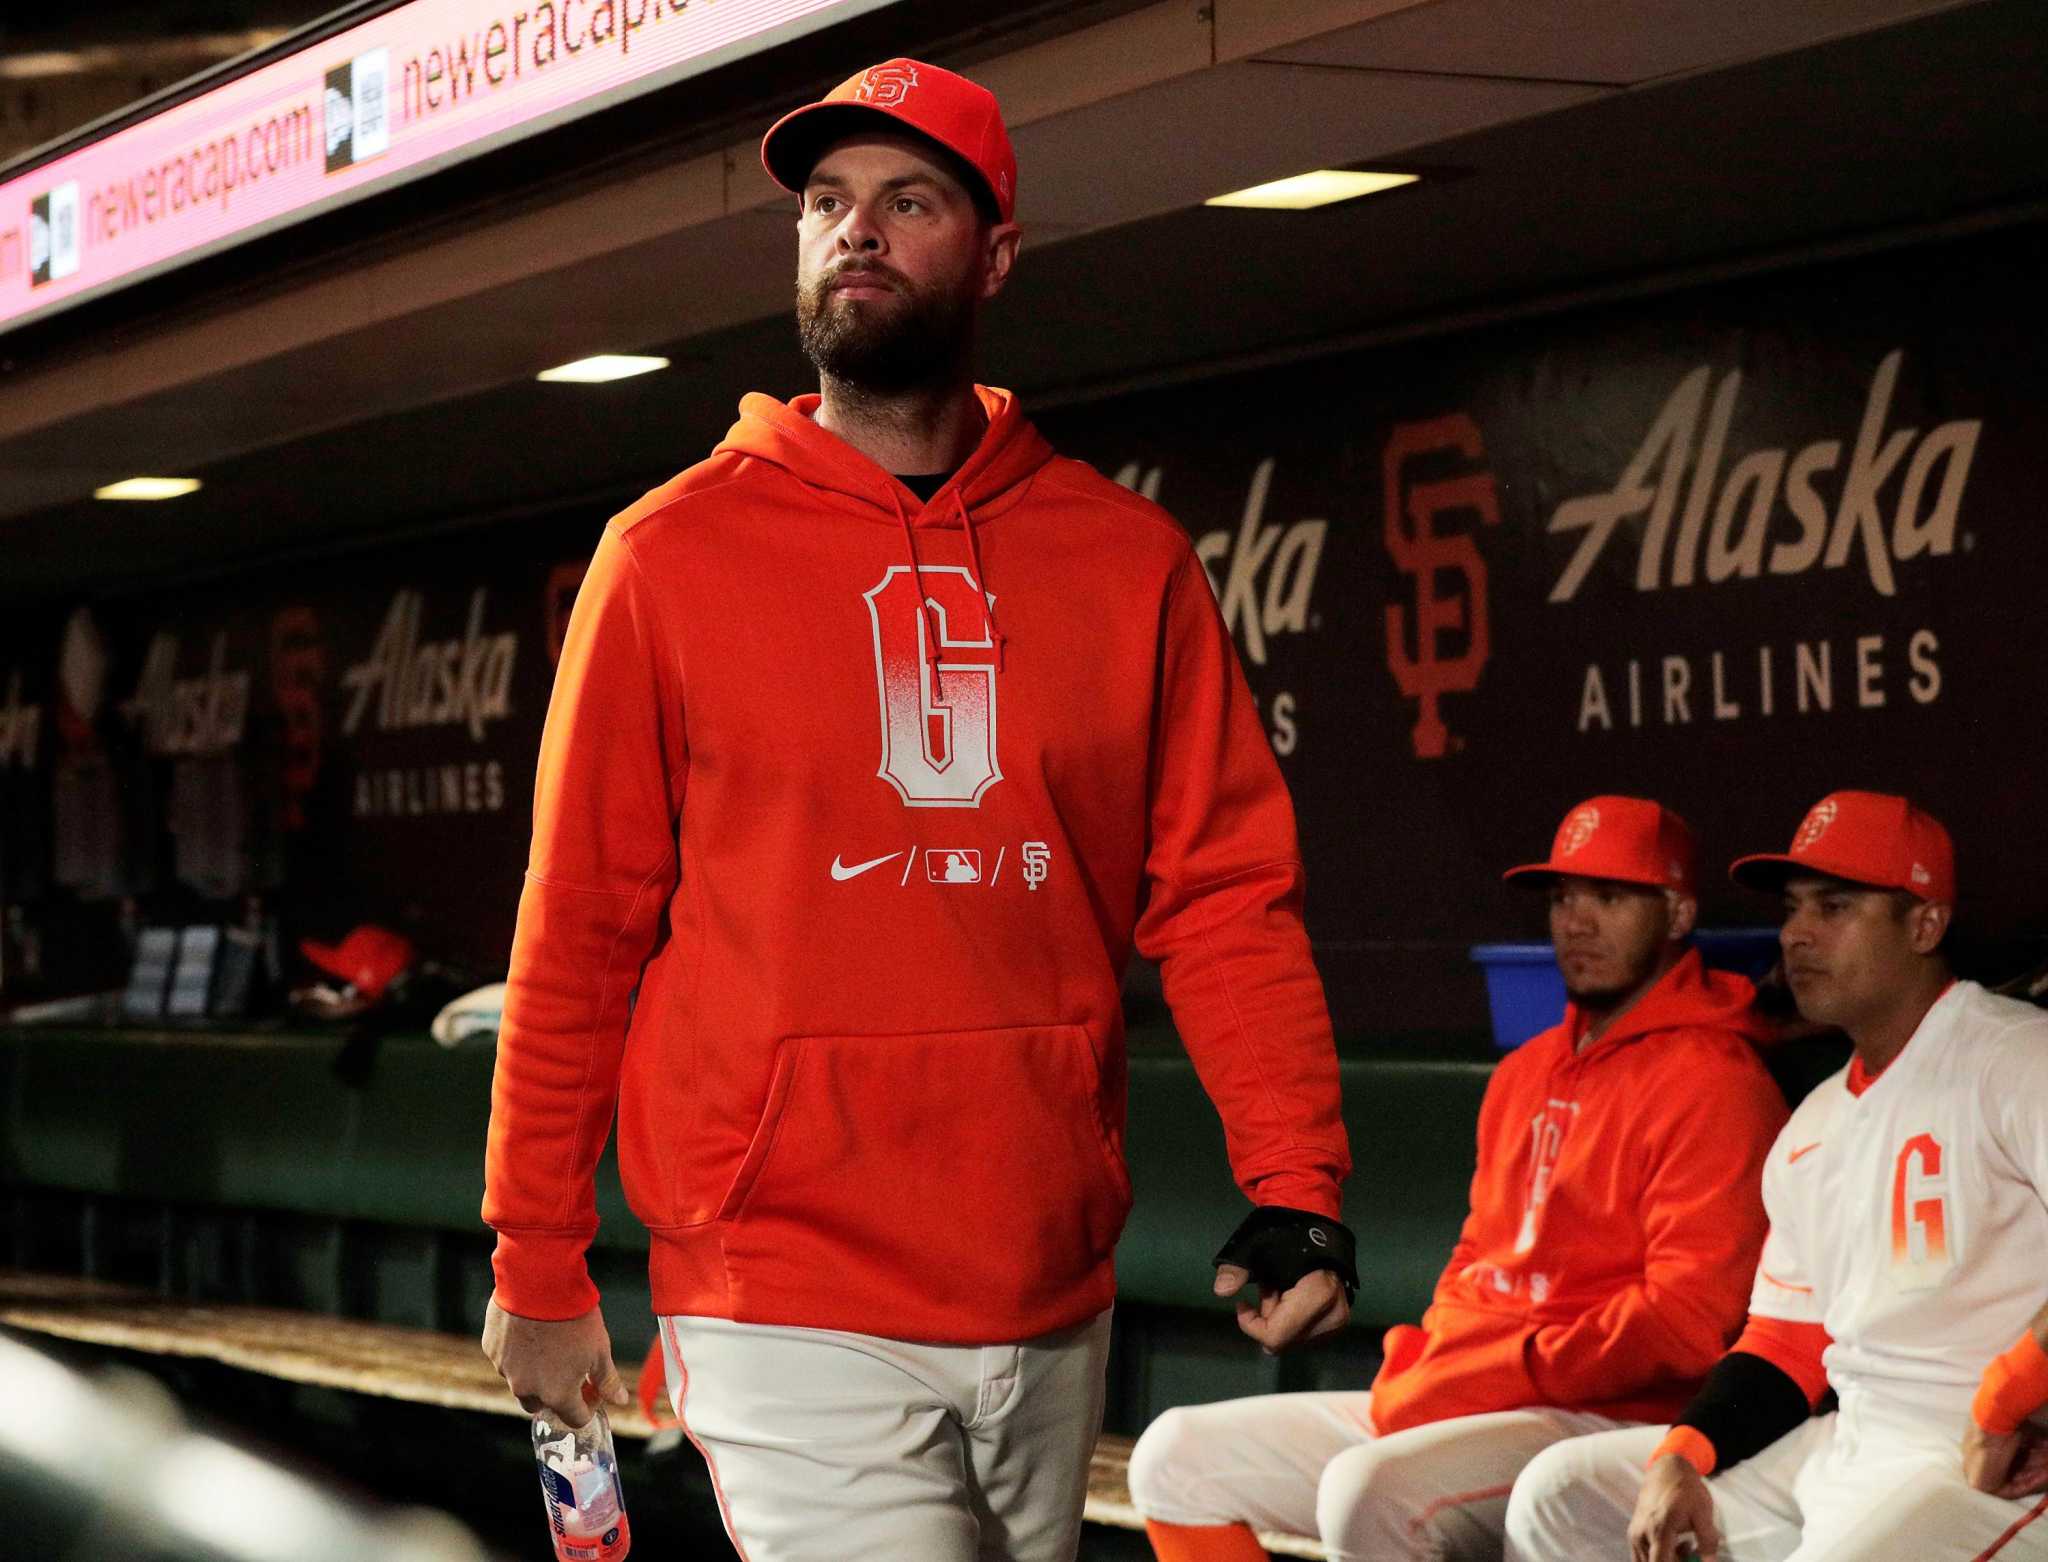 Why Giants' Brandon Belt wants to be like Reds' Joey Votto